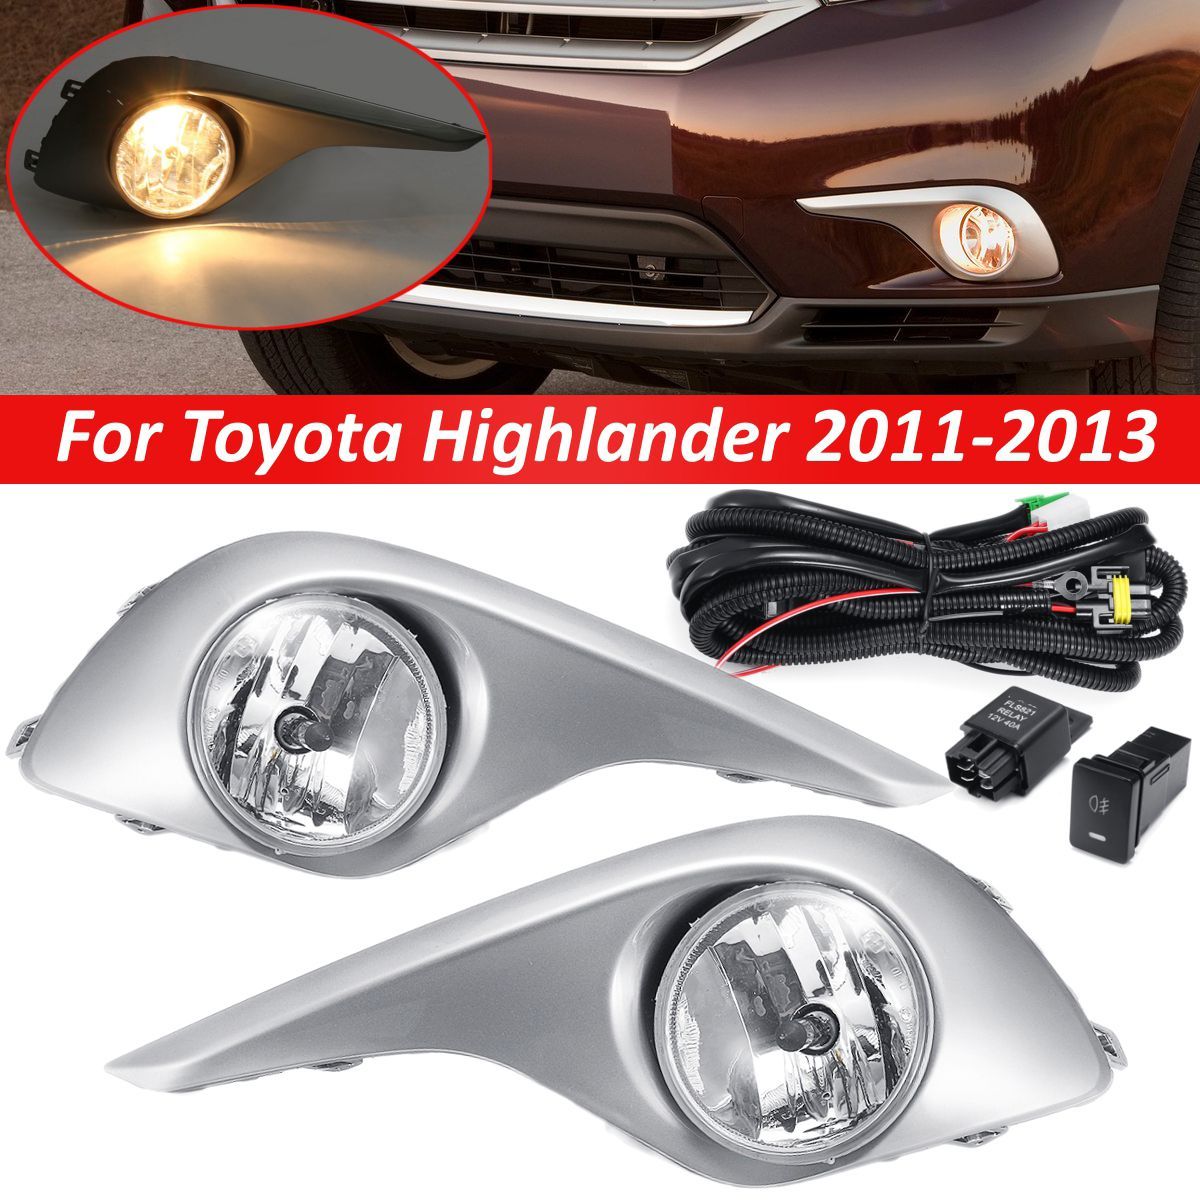 2Pcs-Car-Front-Bumper-Fog-Lights-Signal-Lamps-With-Cover-Harness-Wiring-Kit-For-Toyota-Highlander-20-1677914